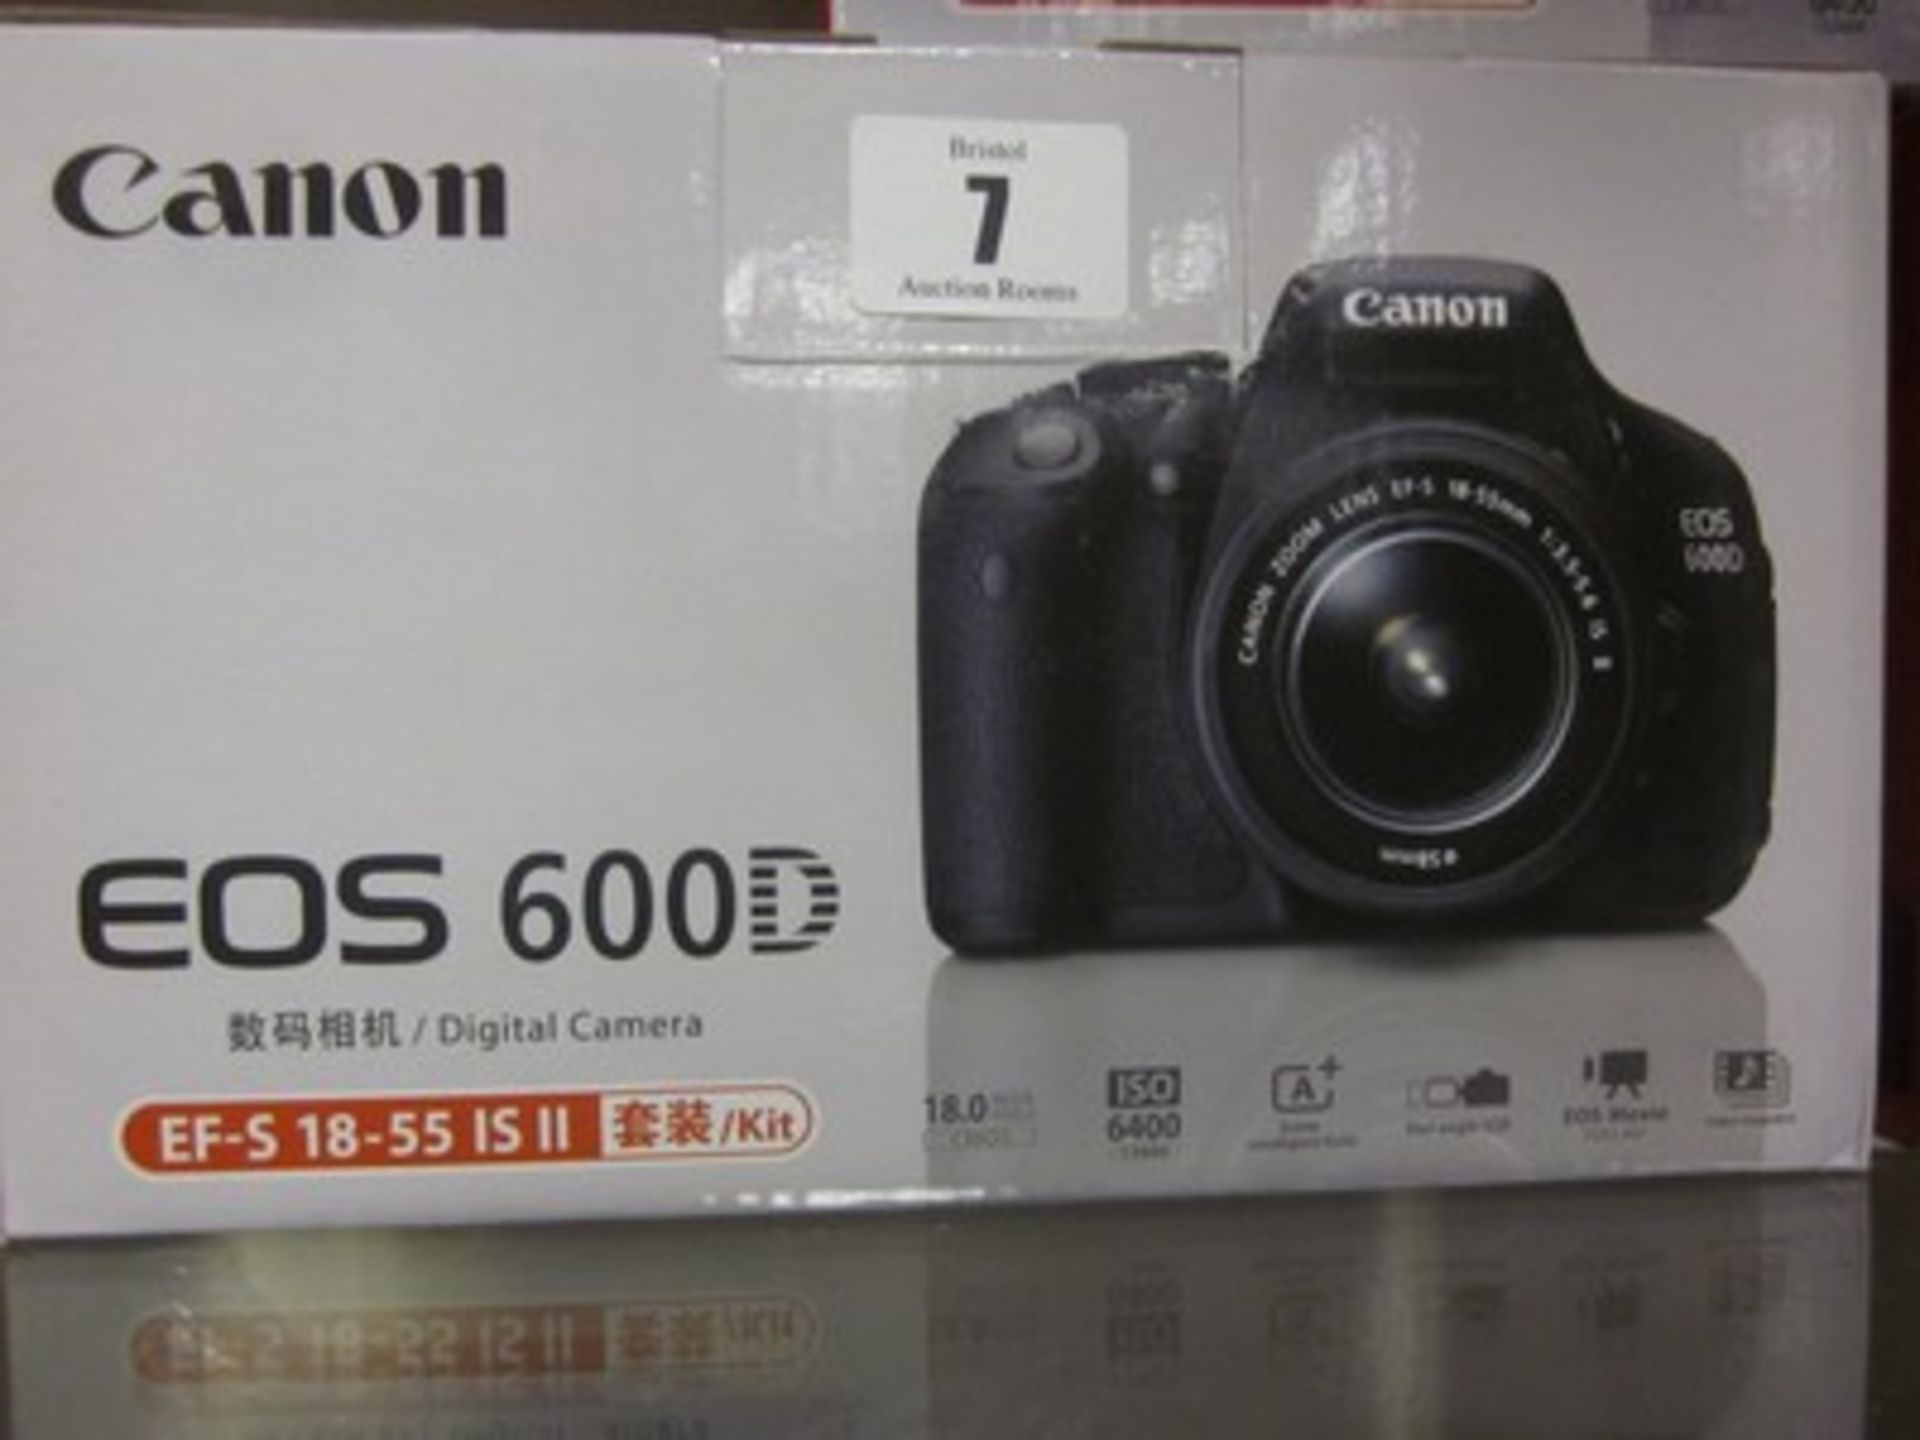 *A Canon EOS 600D EF-S 18-55 IS II KIT (Boxed as new).Payment and collection by 5pm Friday 15th